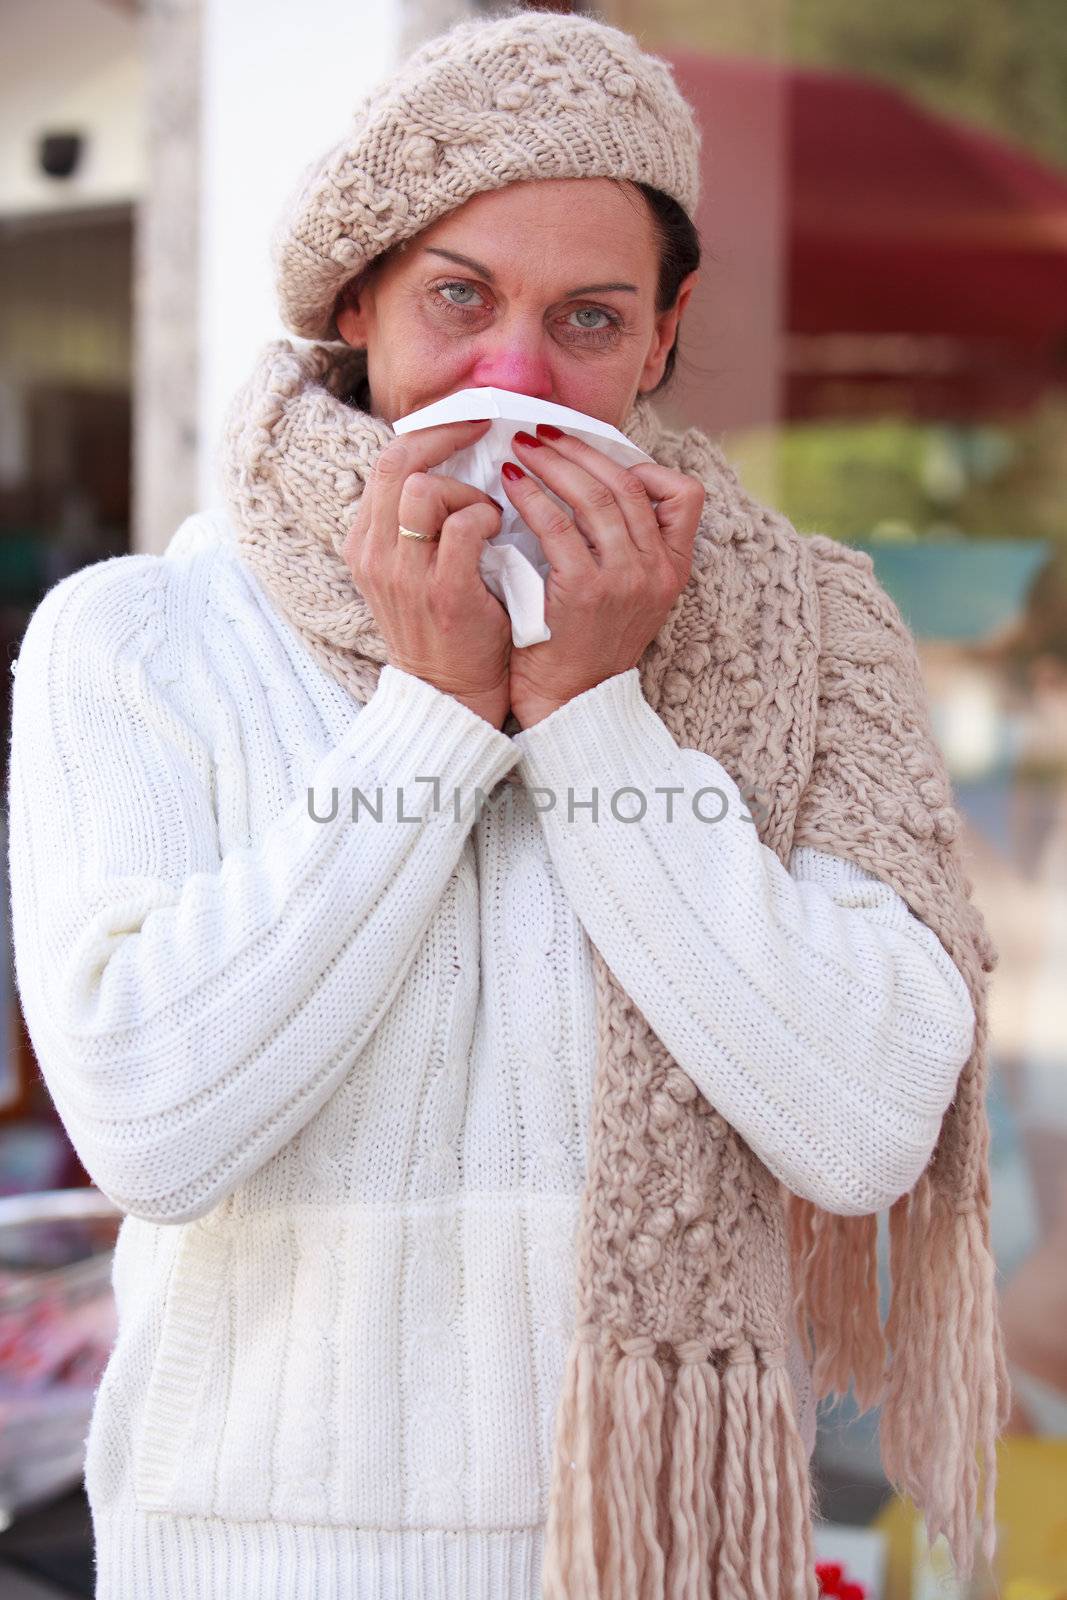 Elderly woman with a cold blows her nose